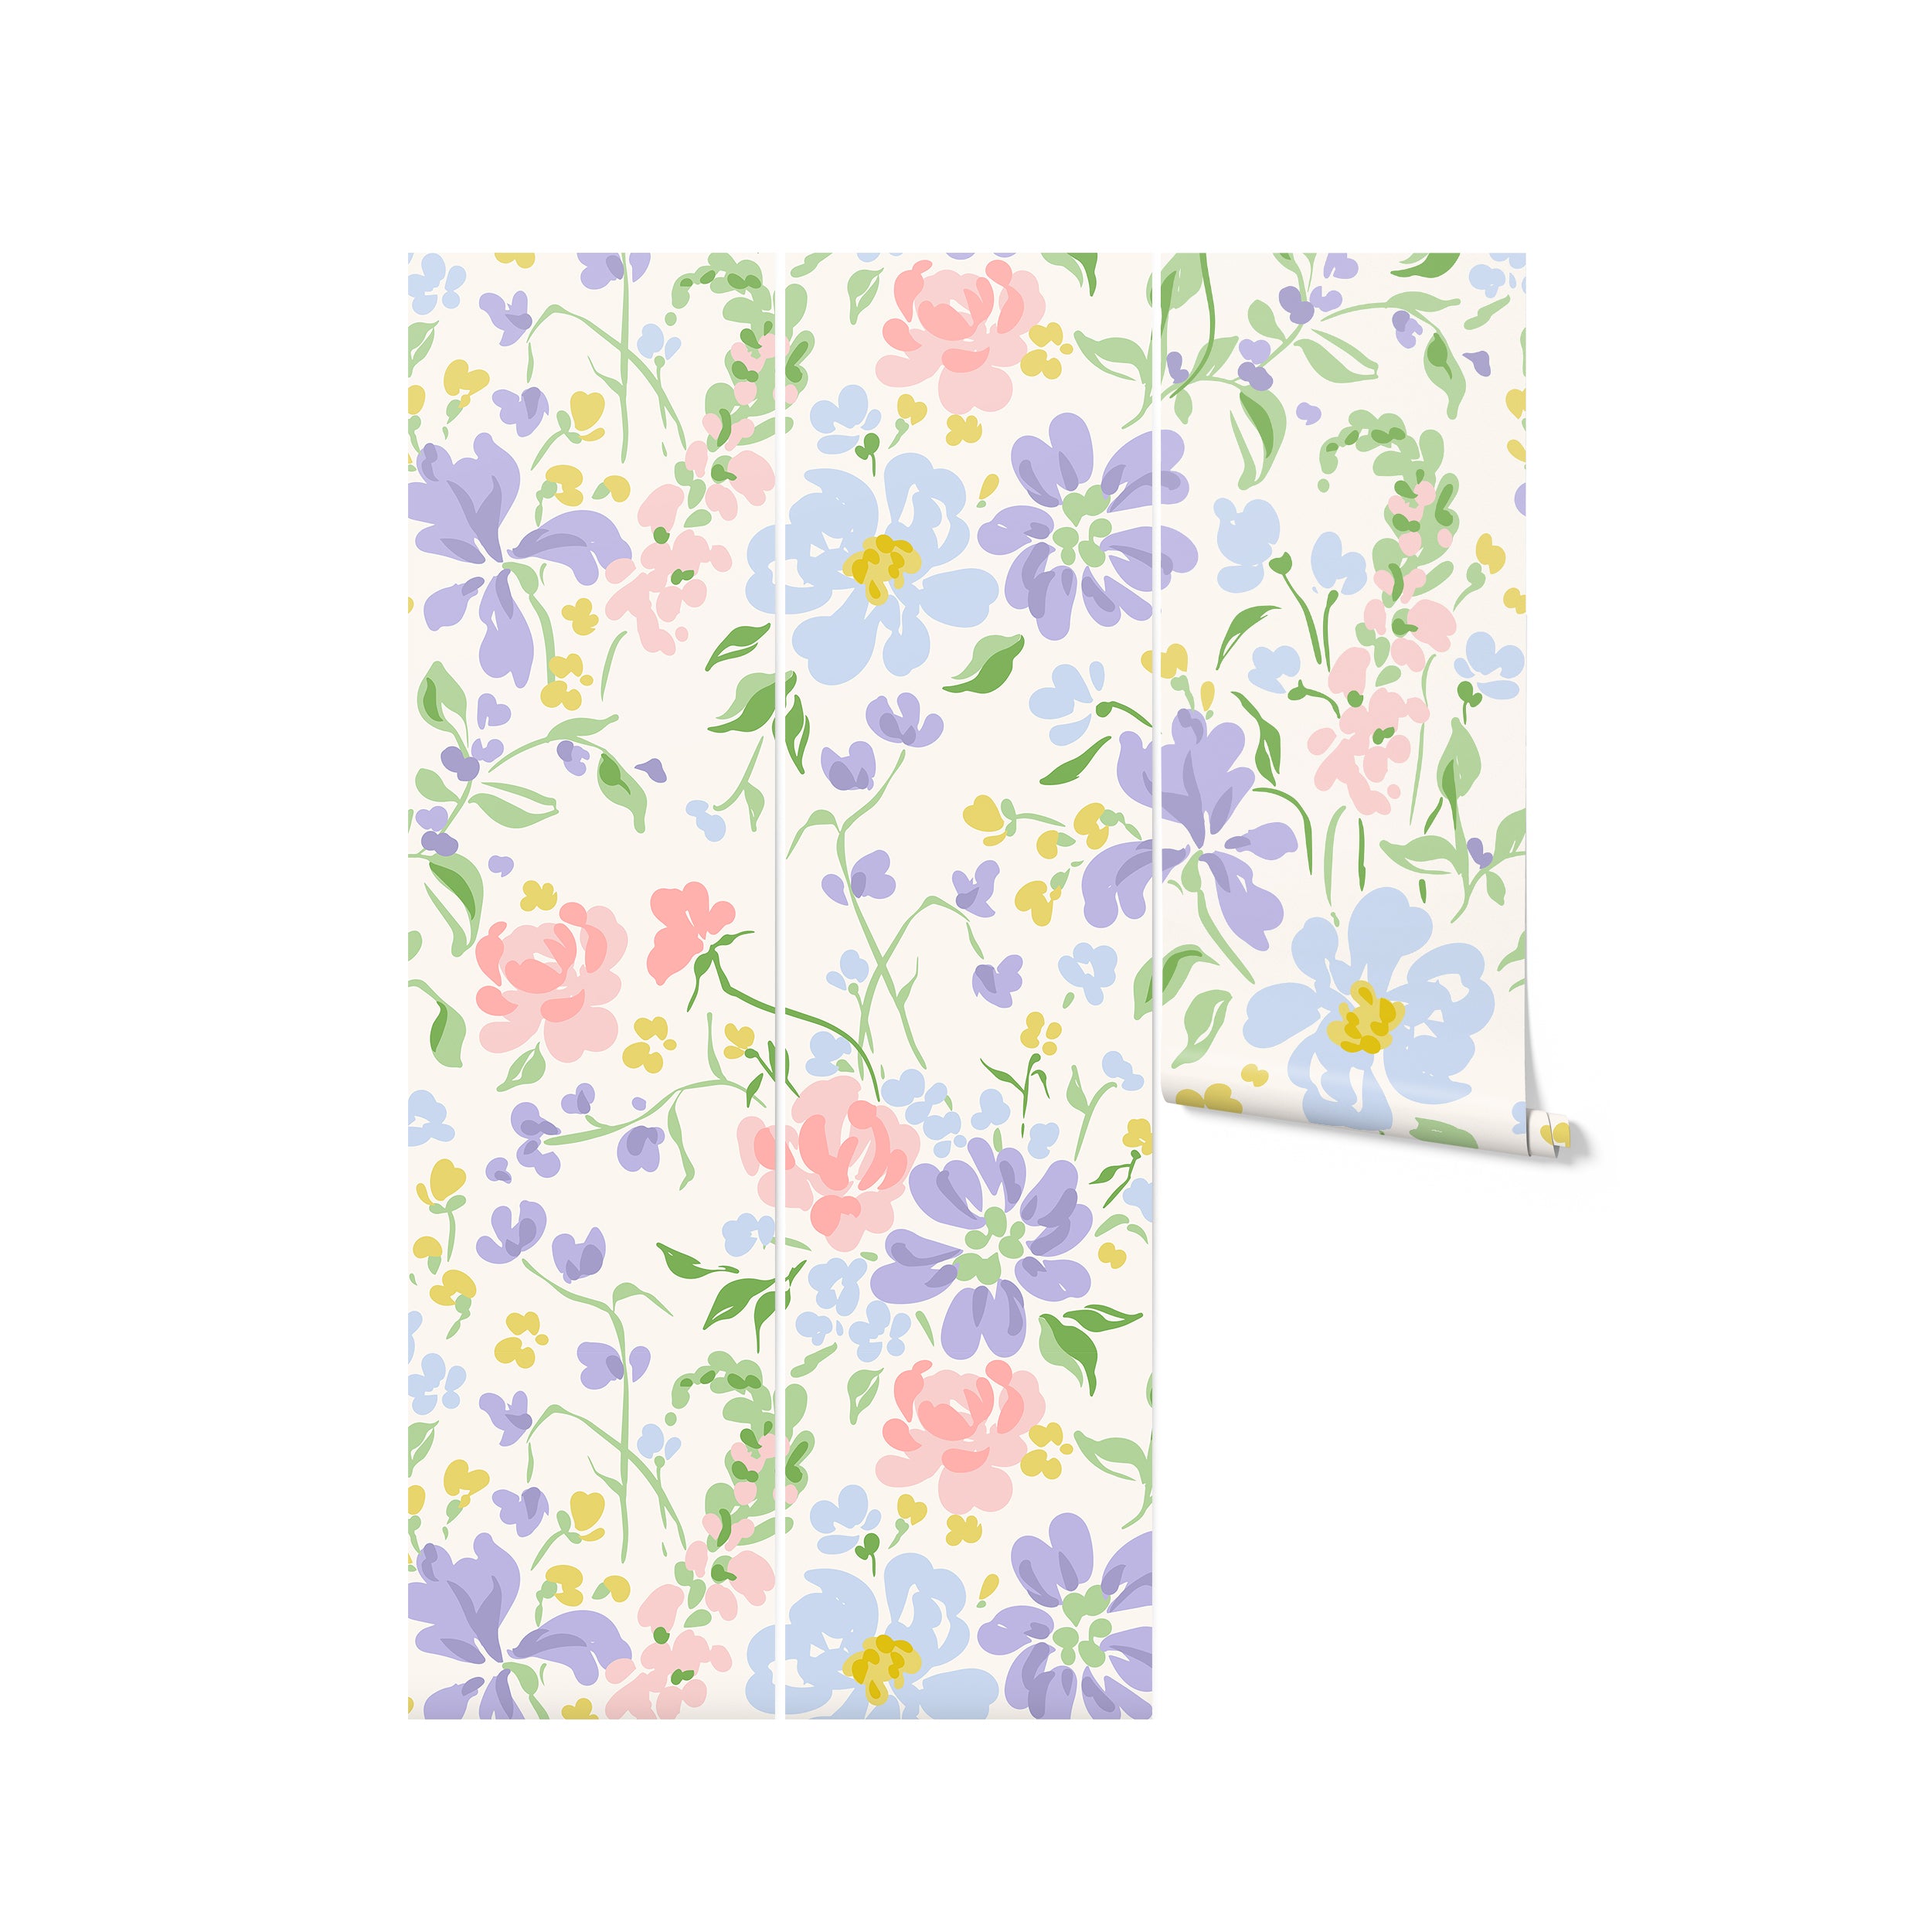 A close-up of the Romana Wallpaper rolled up against a white background, displaying a detailed print of large and small flowers in pastel colors of blue, pink, and yellow intertwined with green foliage.